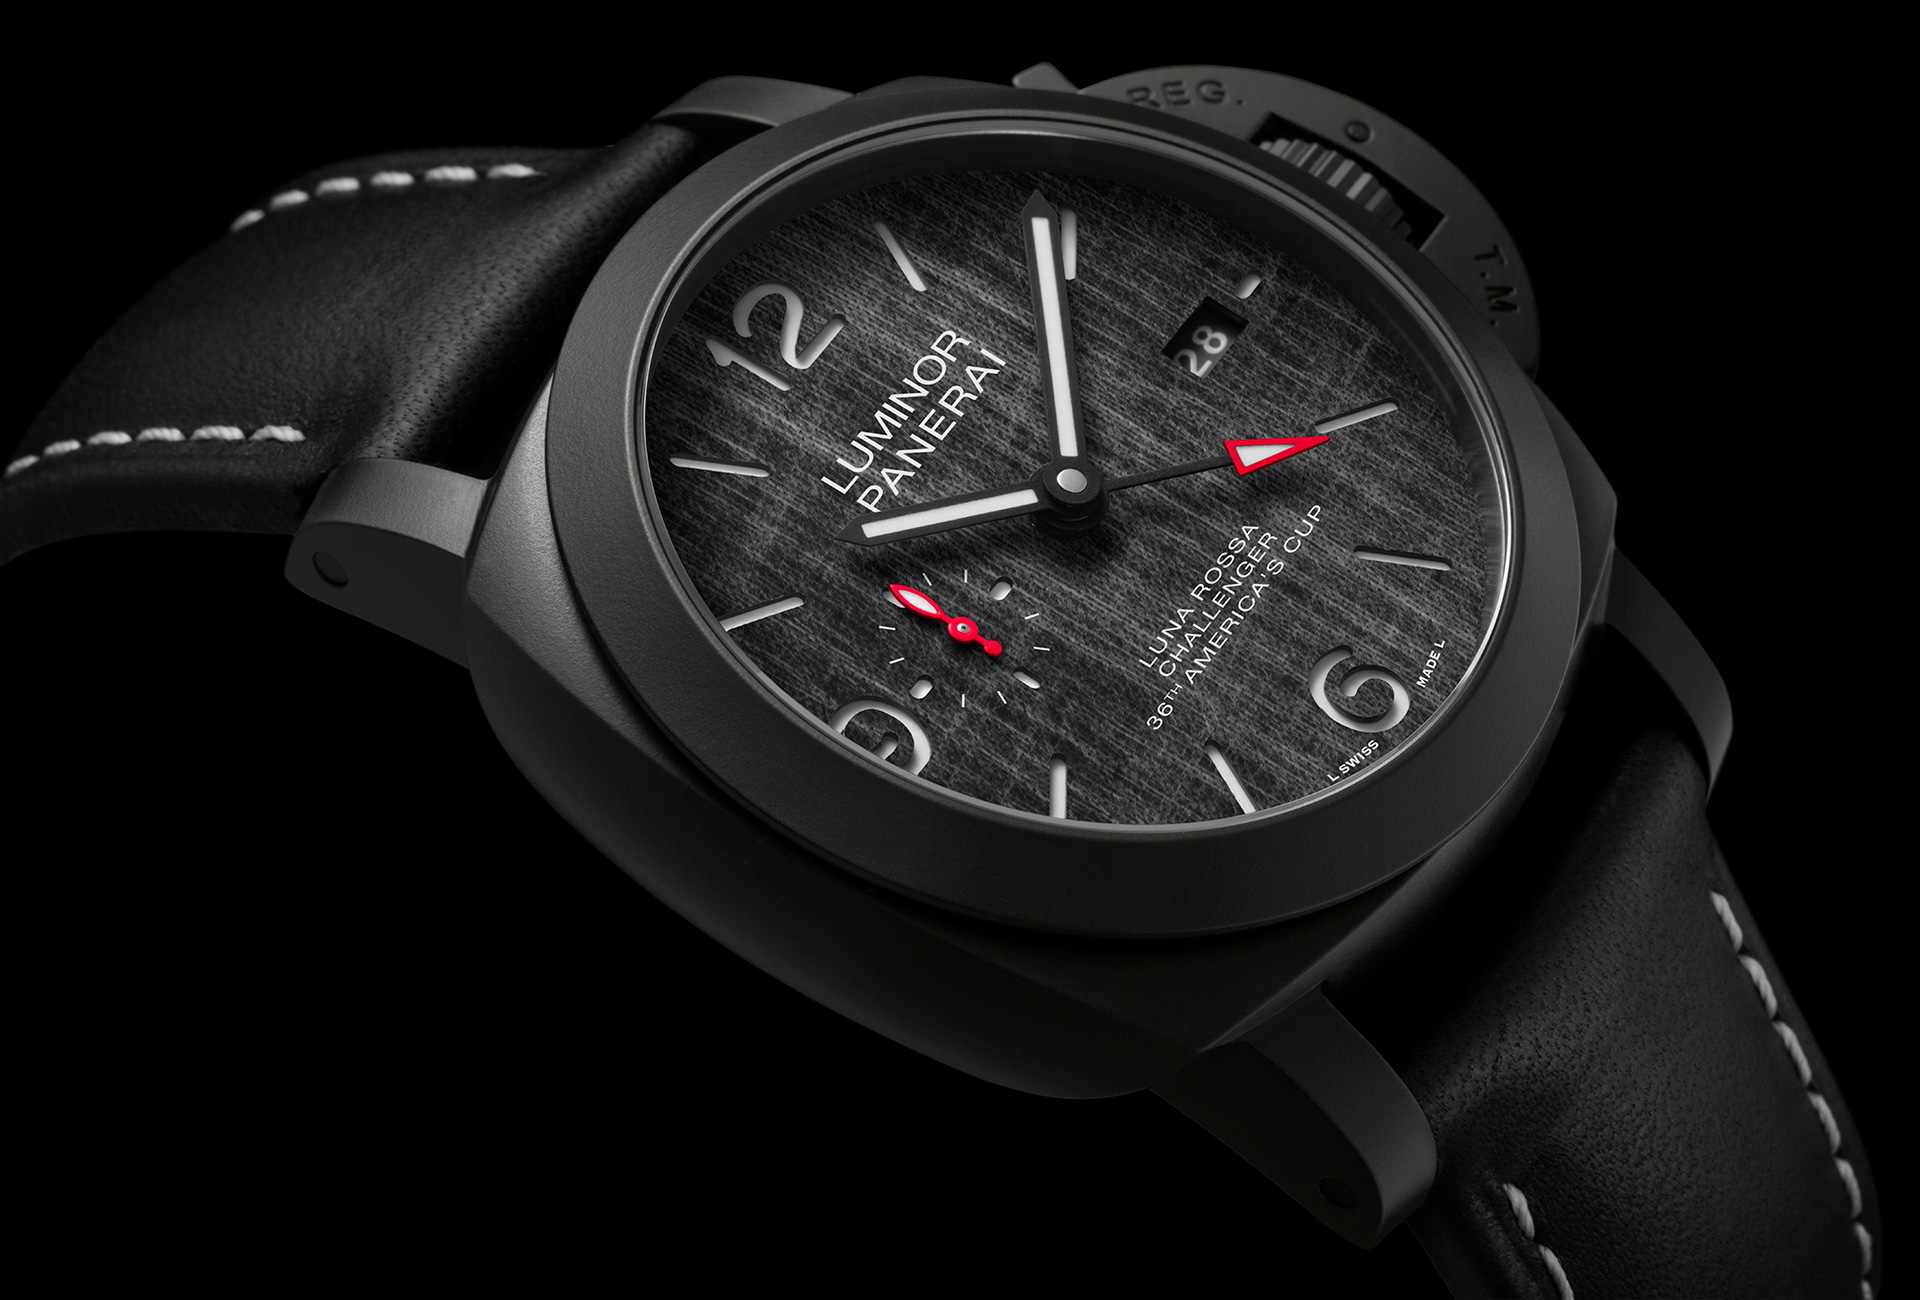 The America's Cup pits Omega and Panerai once again